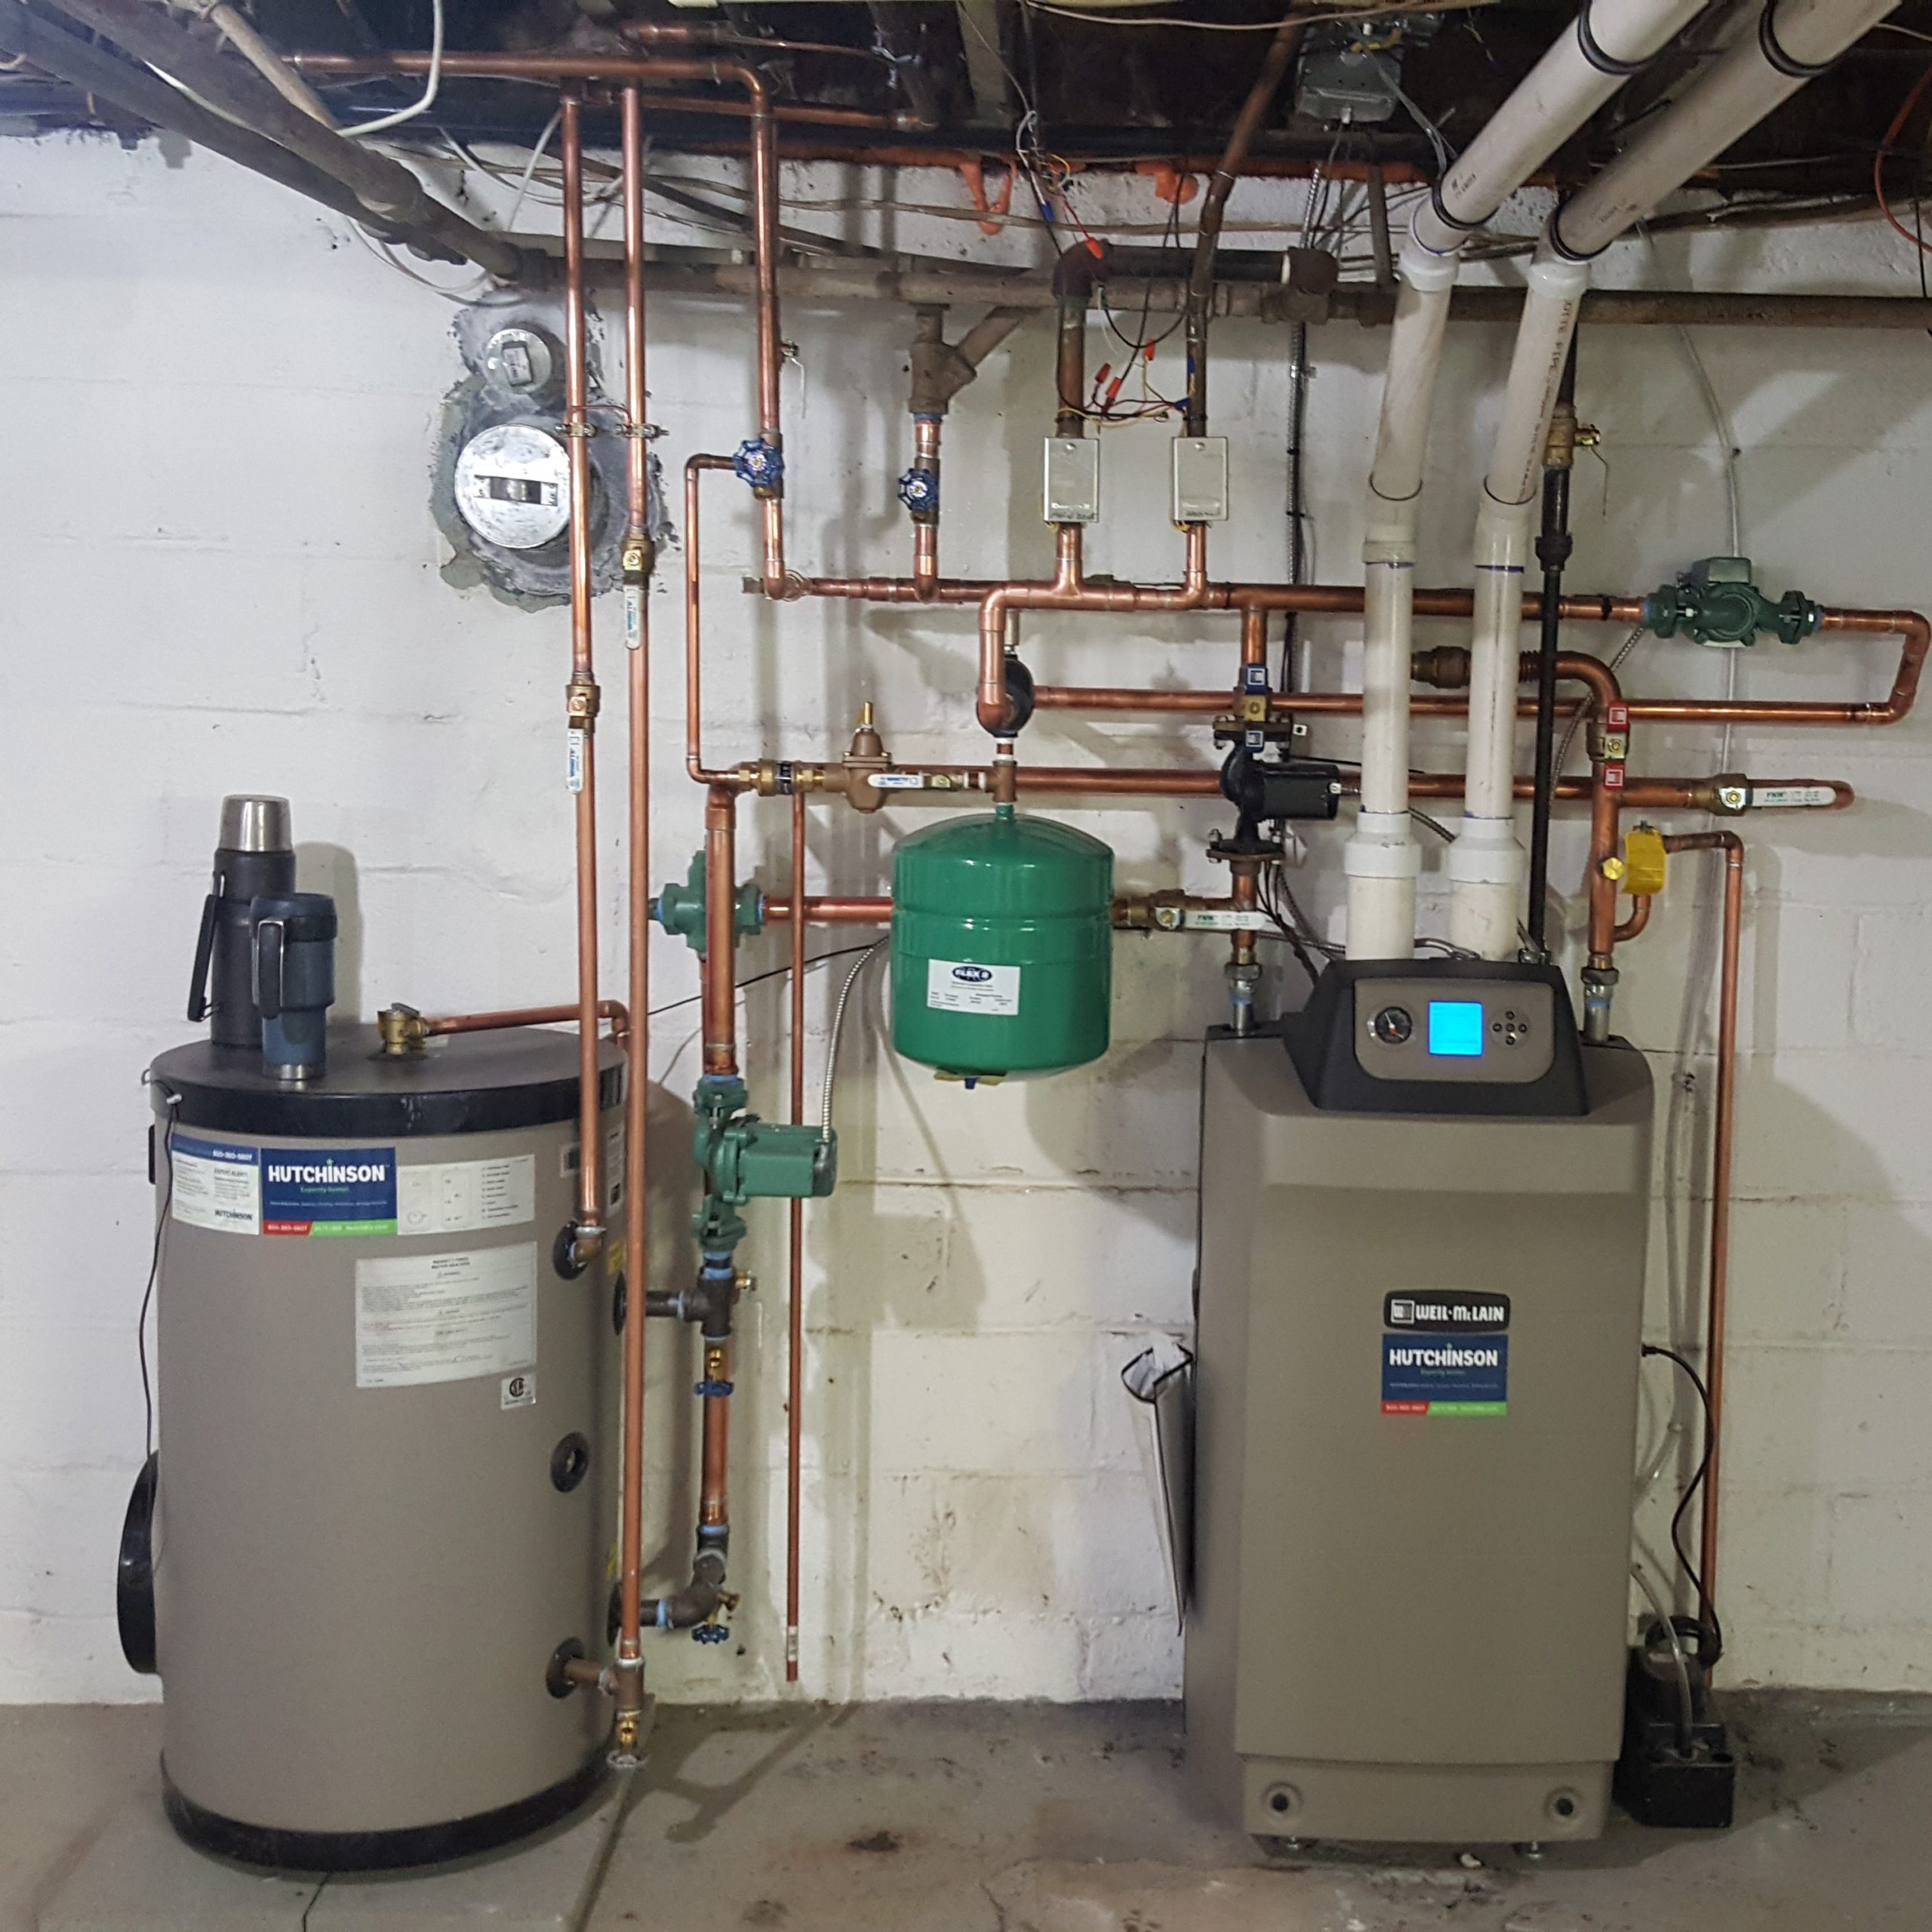 Plumbing, Heating and Air Conditioning Services in Ewan, NJ